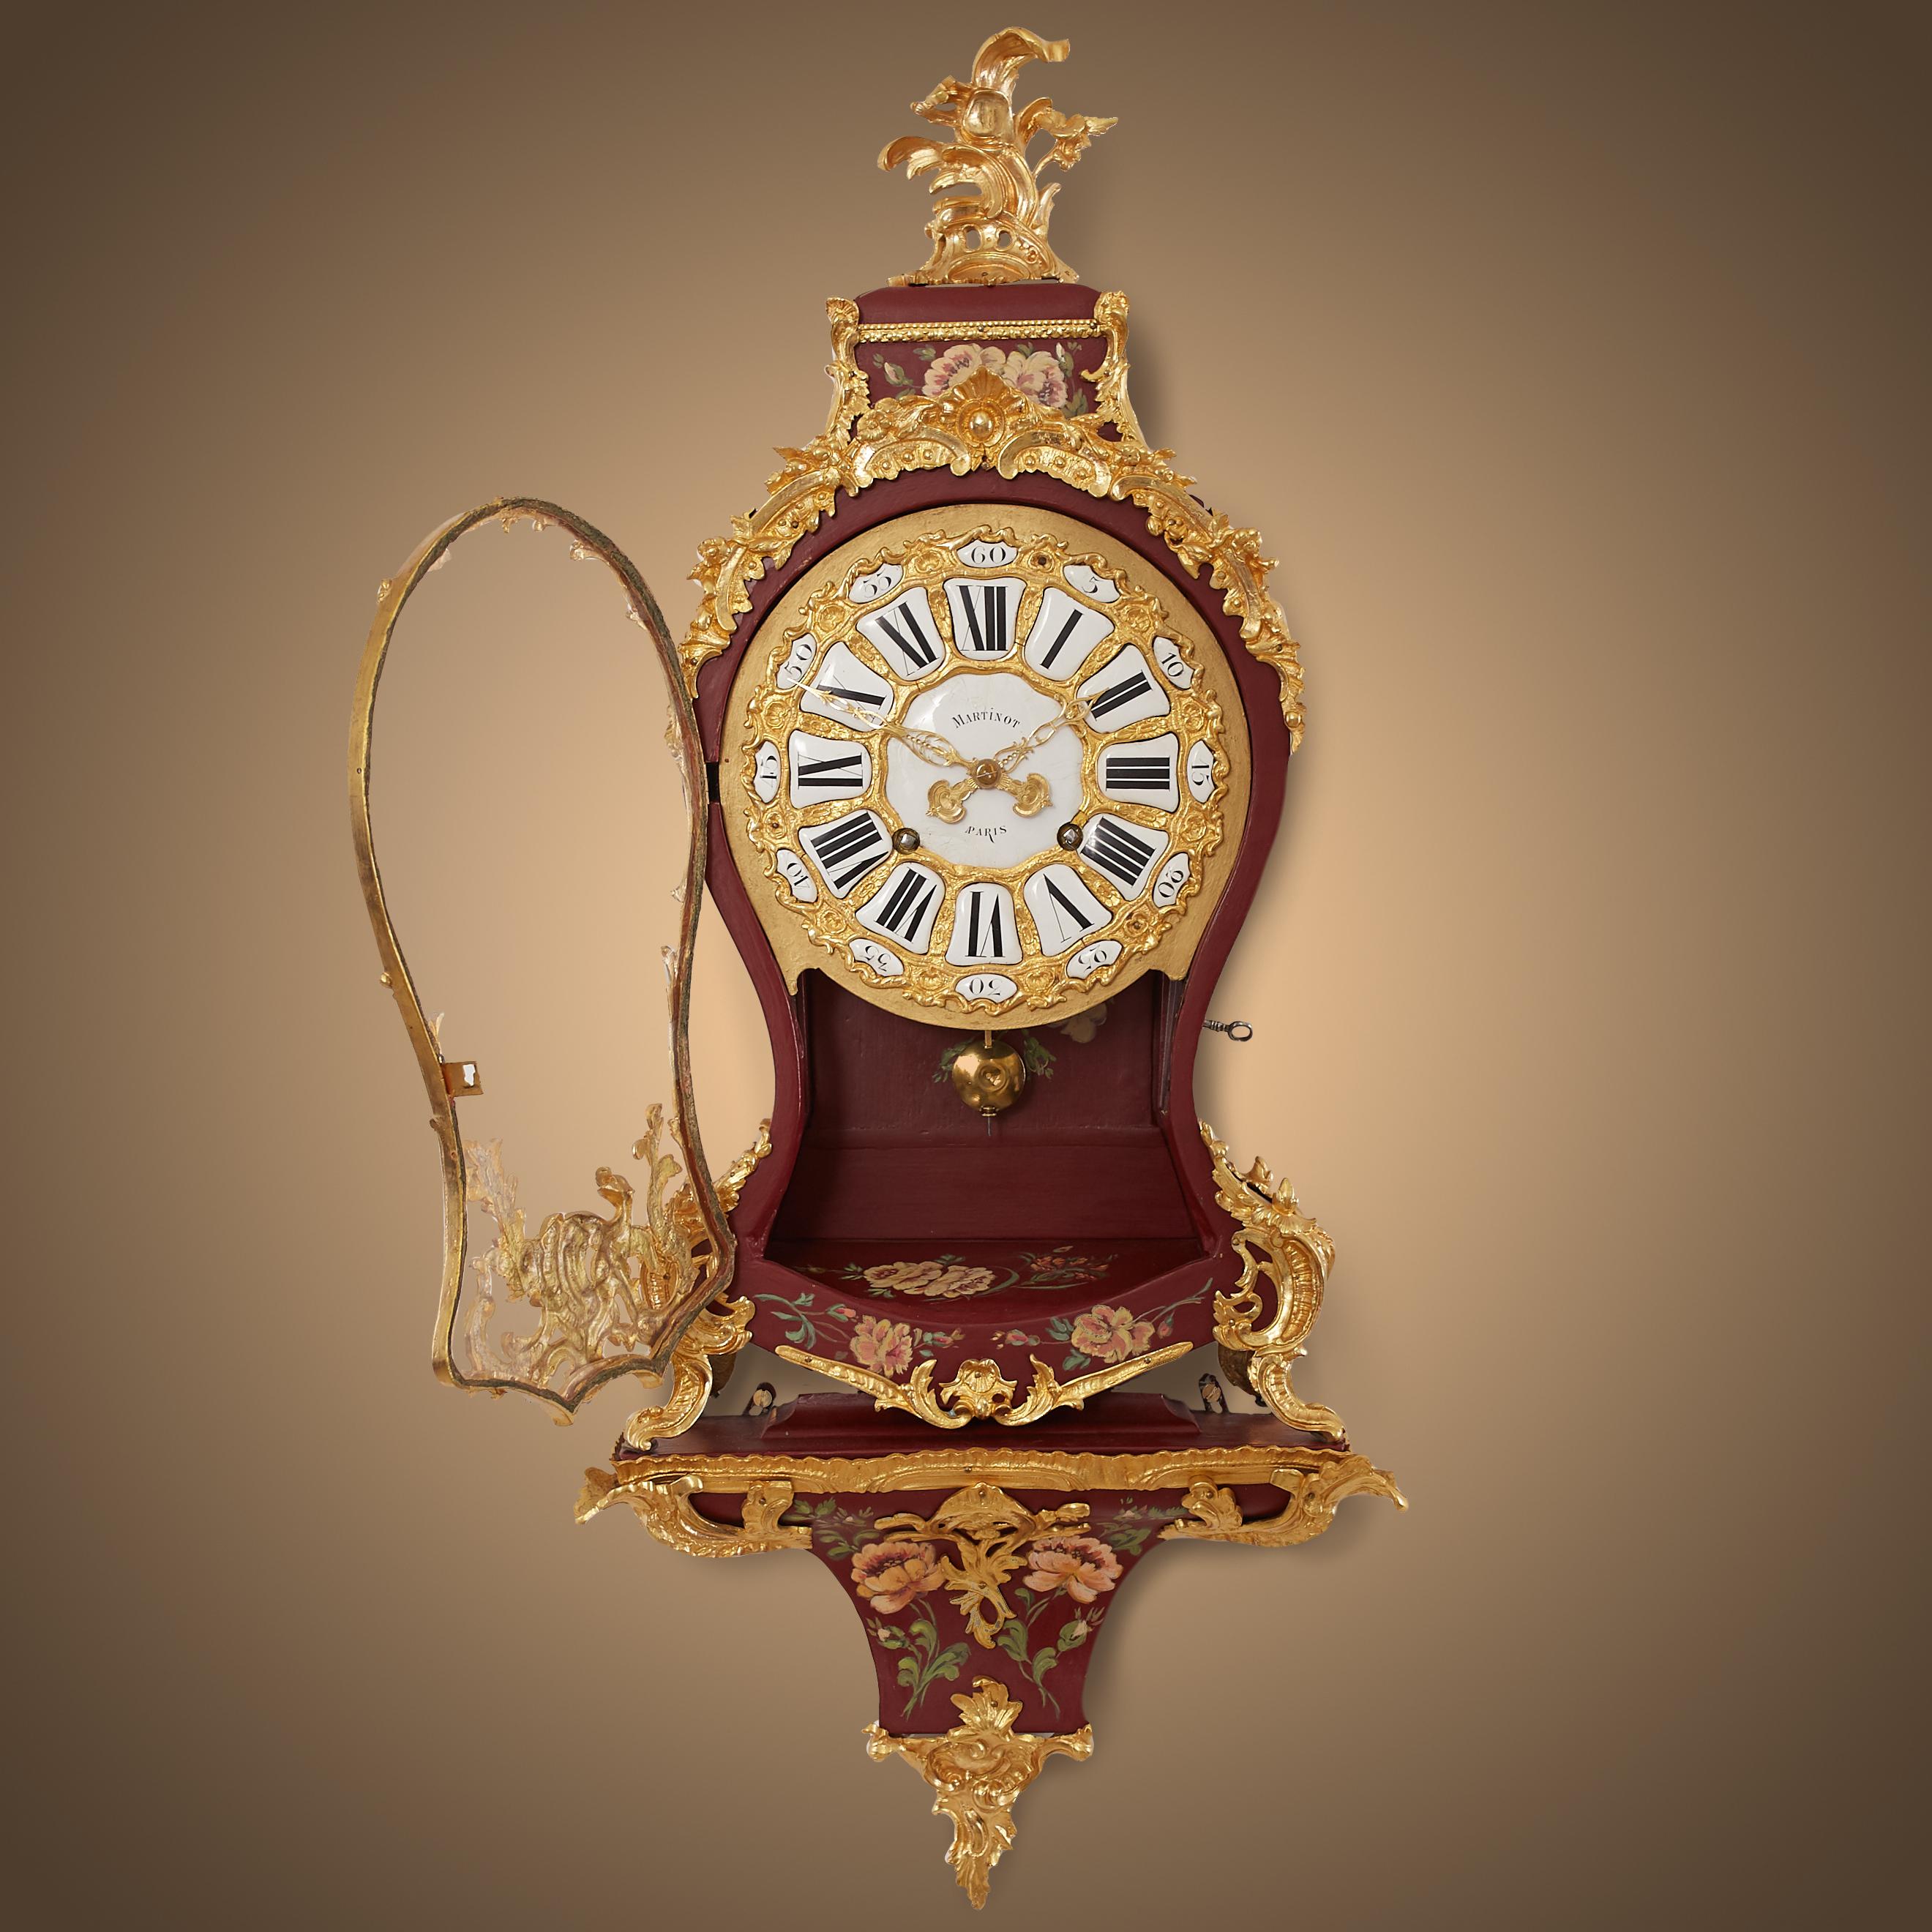 This ravishing antique cartel clock is in the Rococo style that prevailed during the reign of Louis XV. Crafted with great ingenuity and intense creativity from Balthazar Martinot (1636-1714), the clock carries a royal breath. 
The antique French